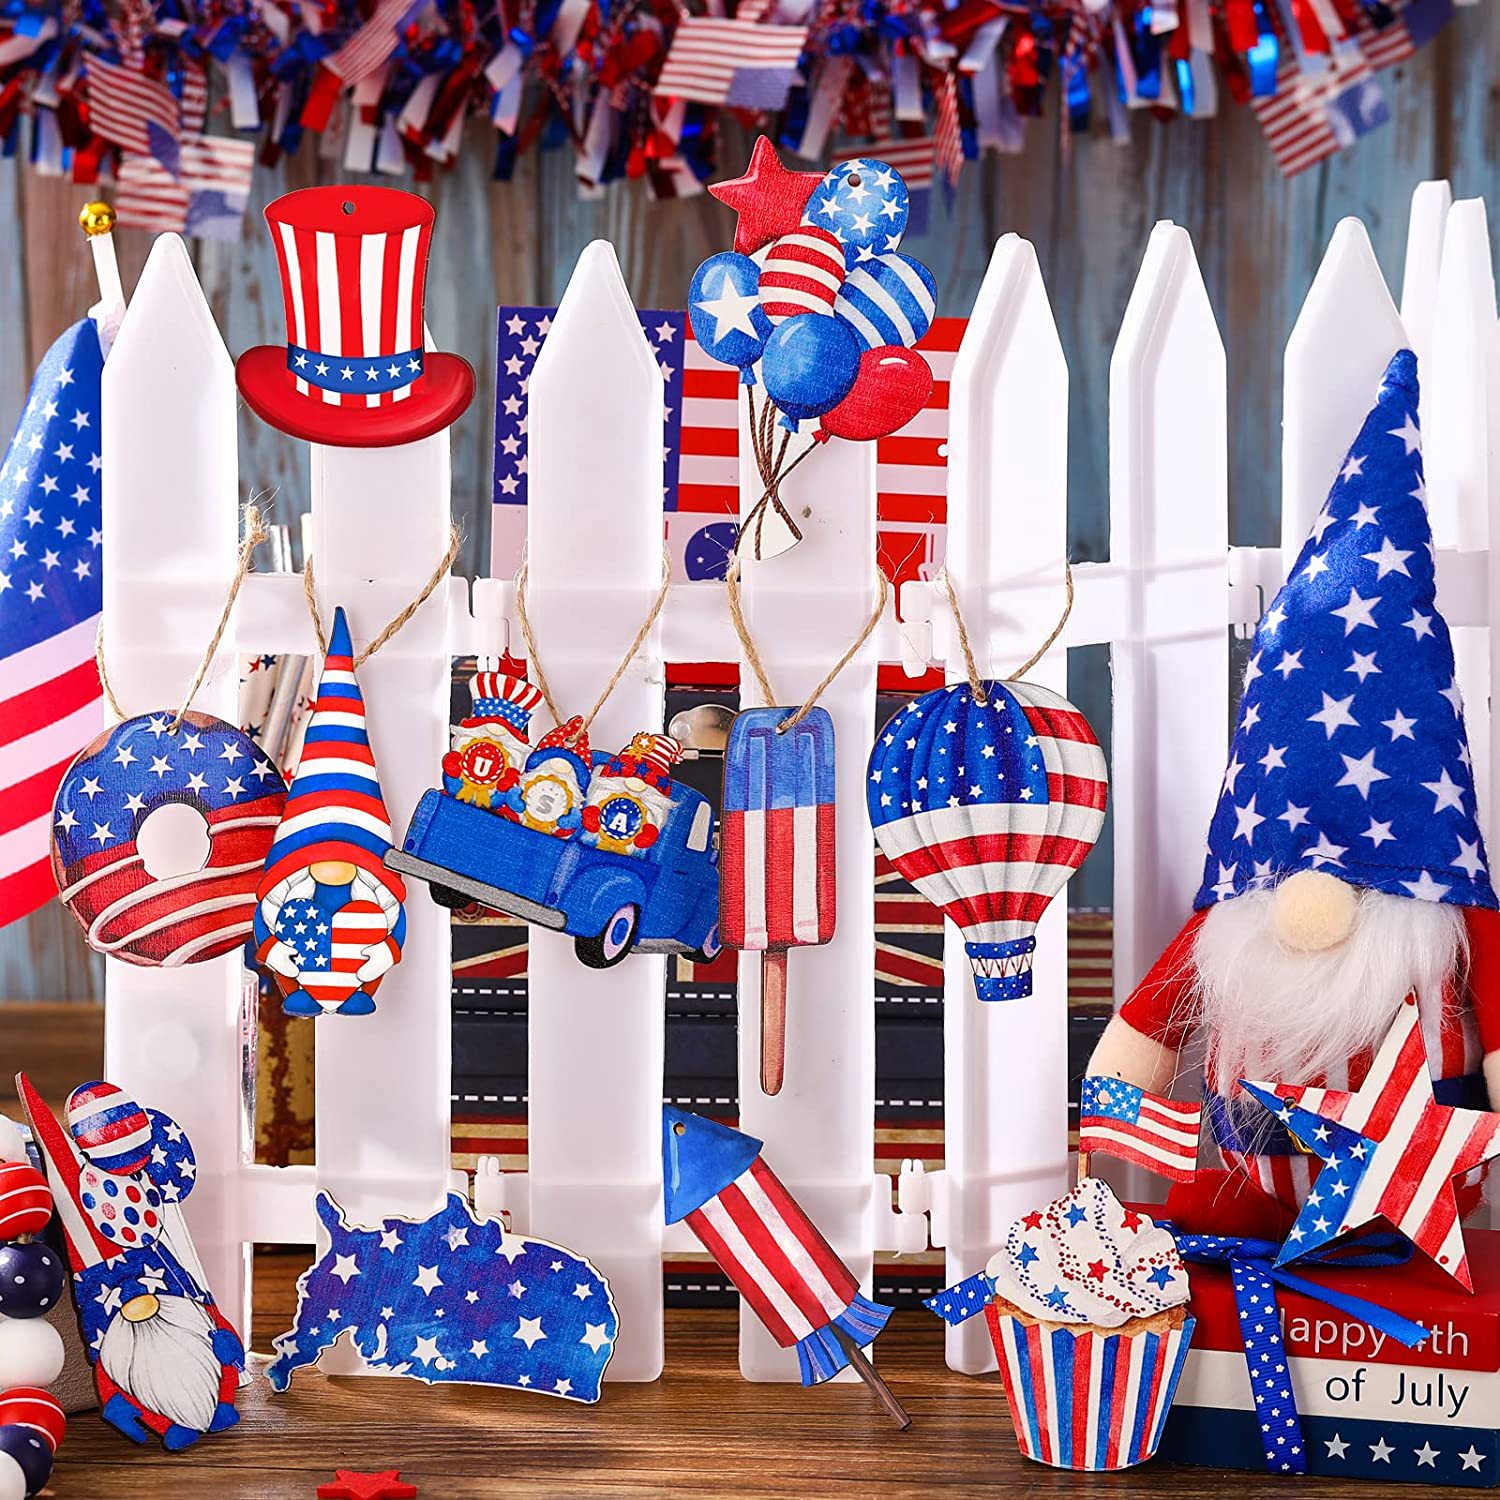 Celebrate Independence Day with 36-Piece Patriotic Ornament Set for Tree Decoration